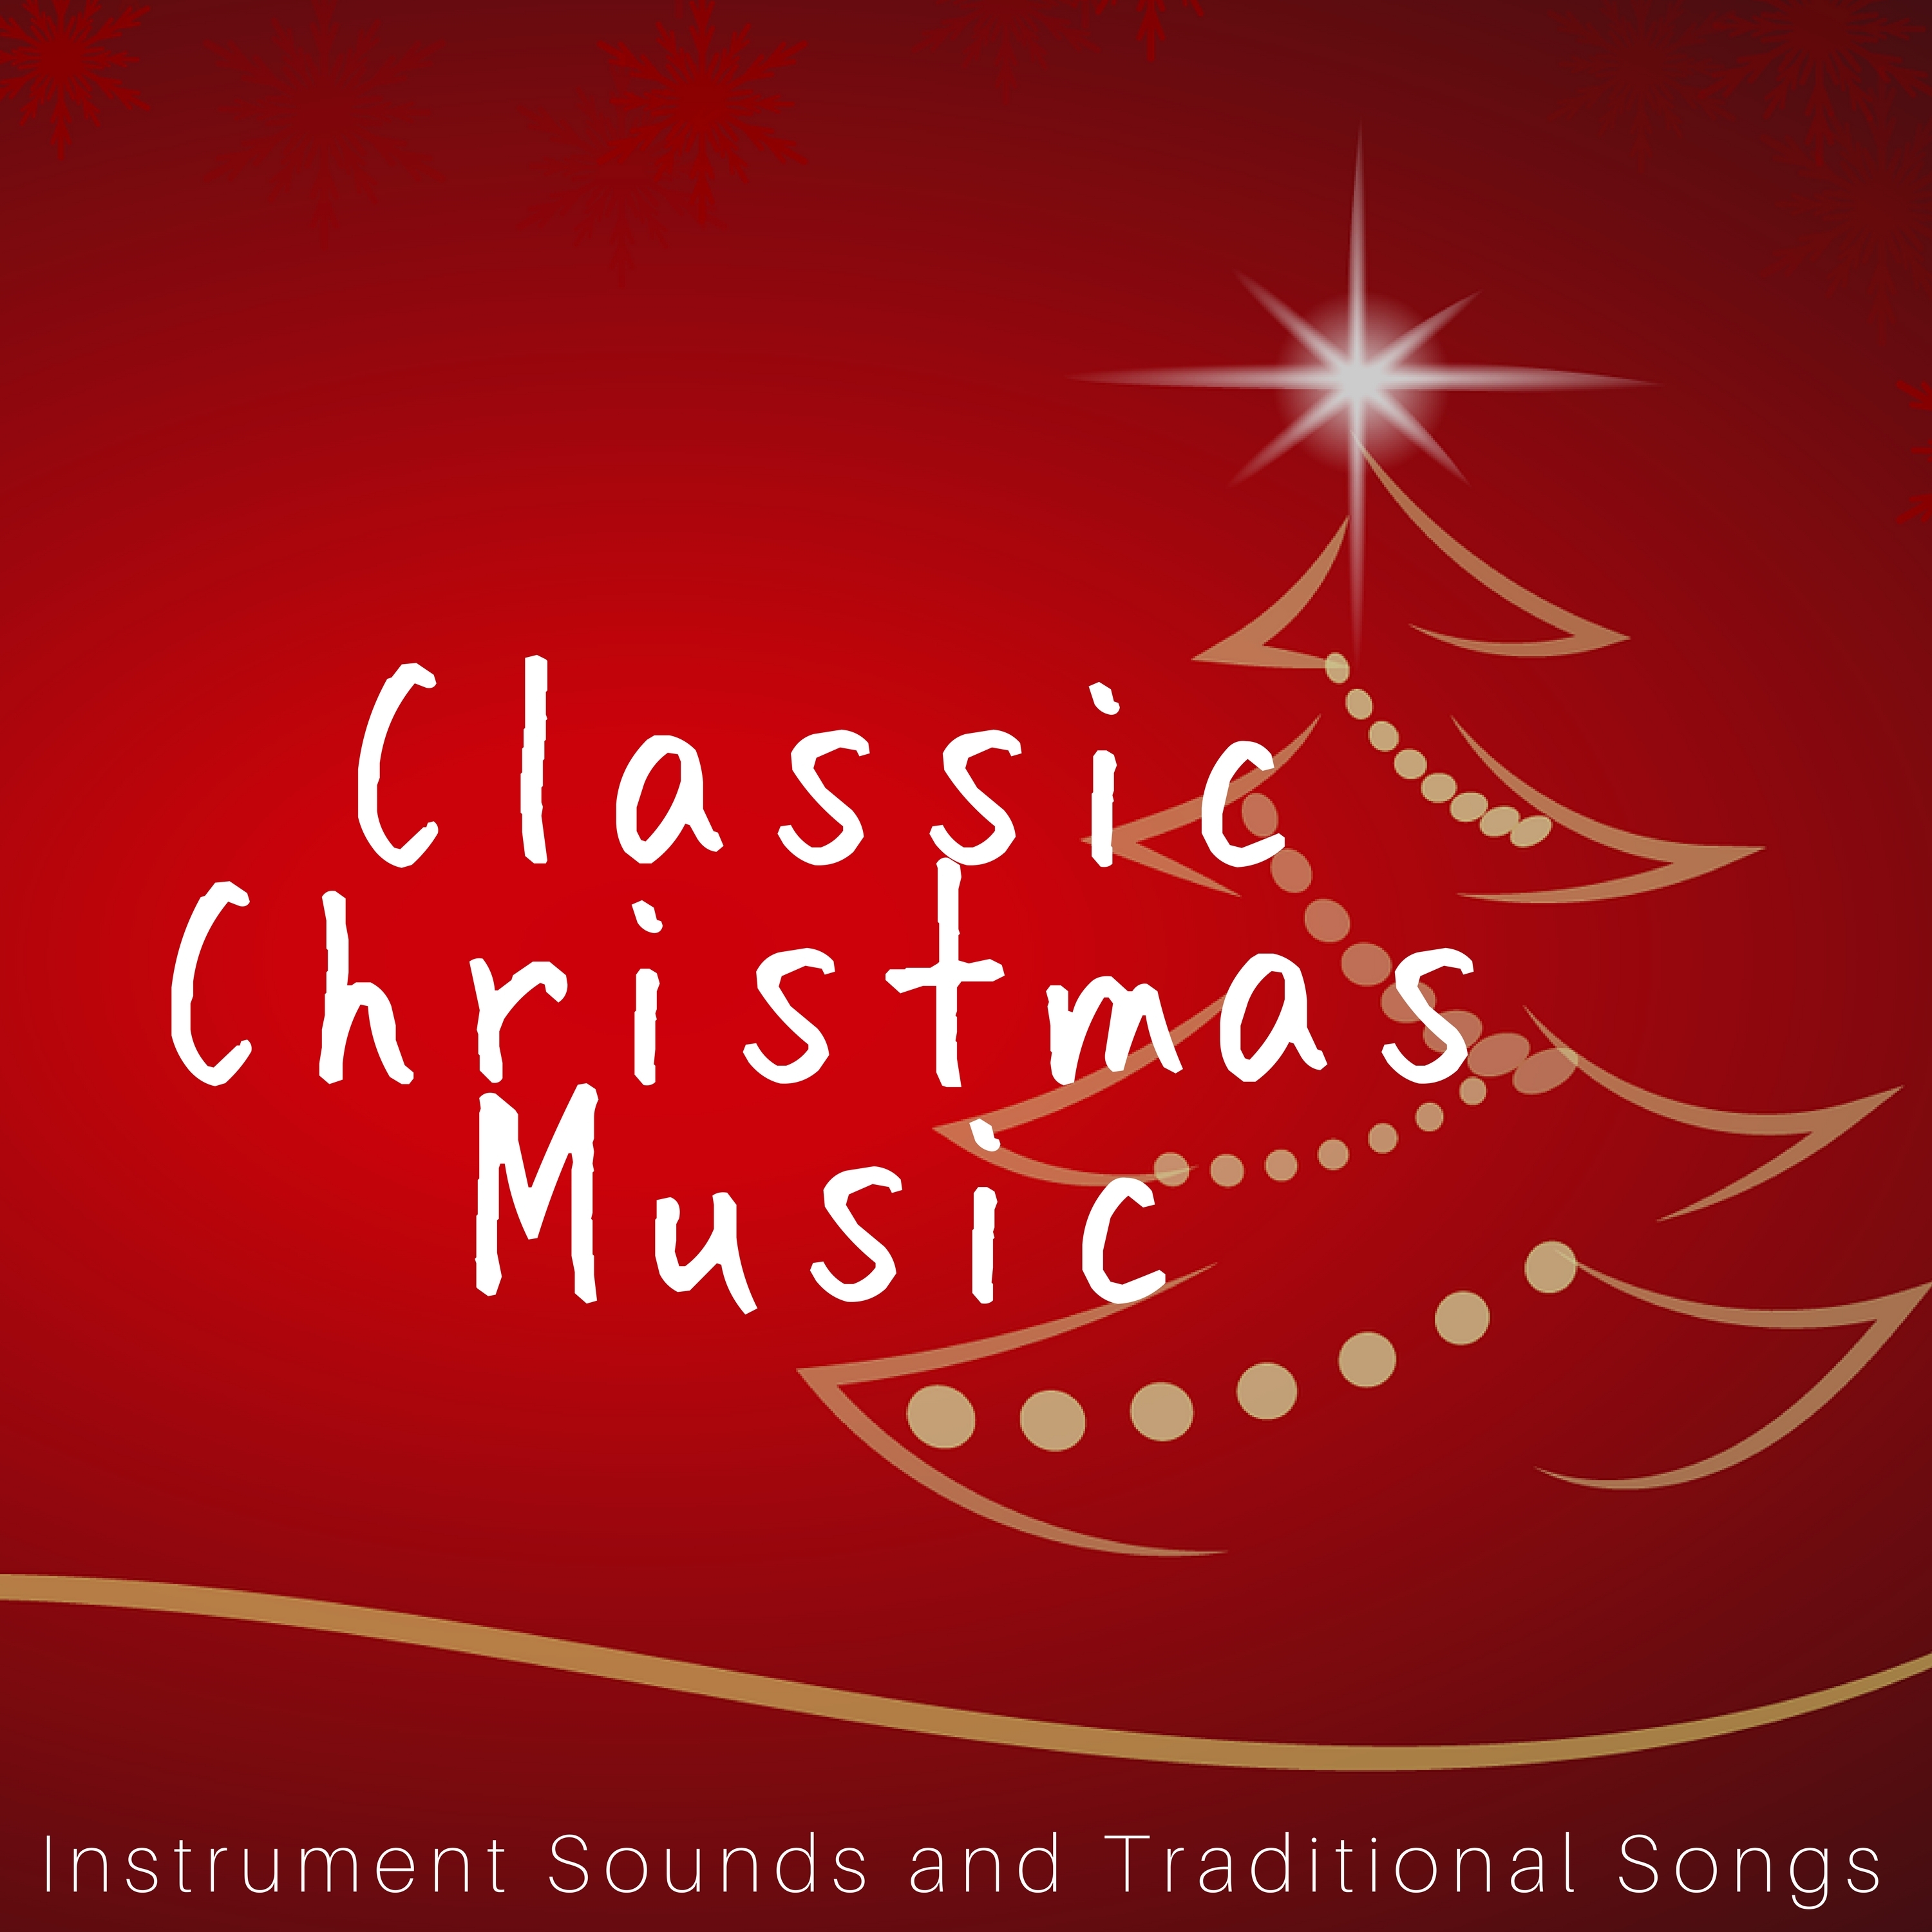 Classic Christmas Music: Instrument Sounds and Traditional Songs for Holidays 2017, Christmas Time